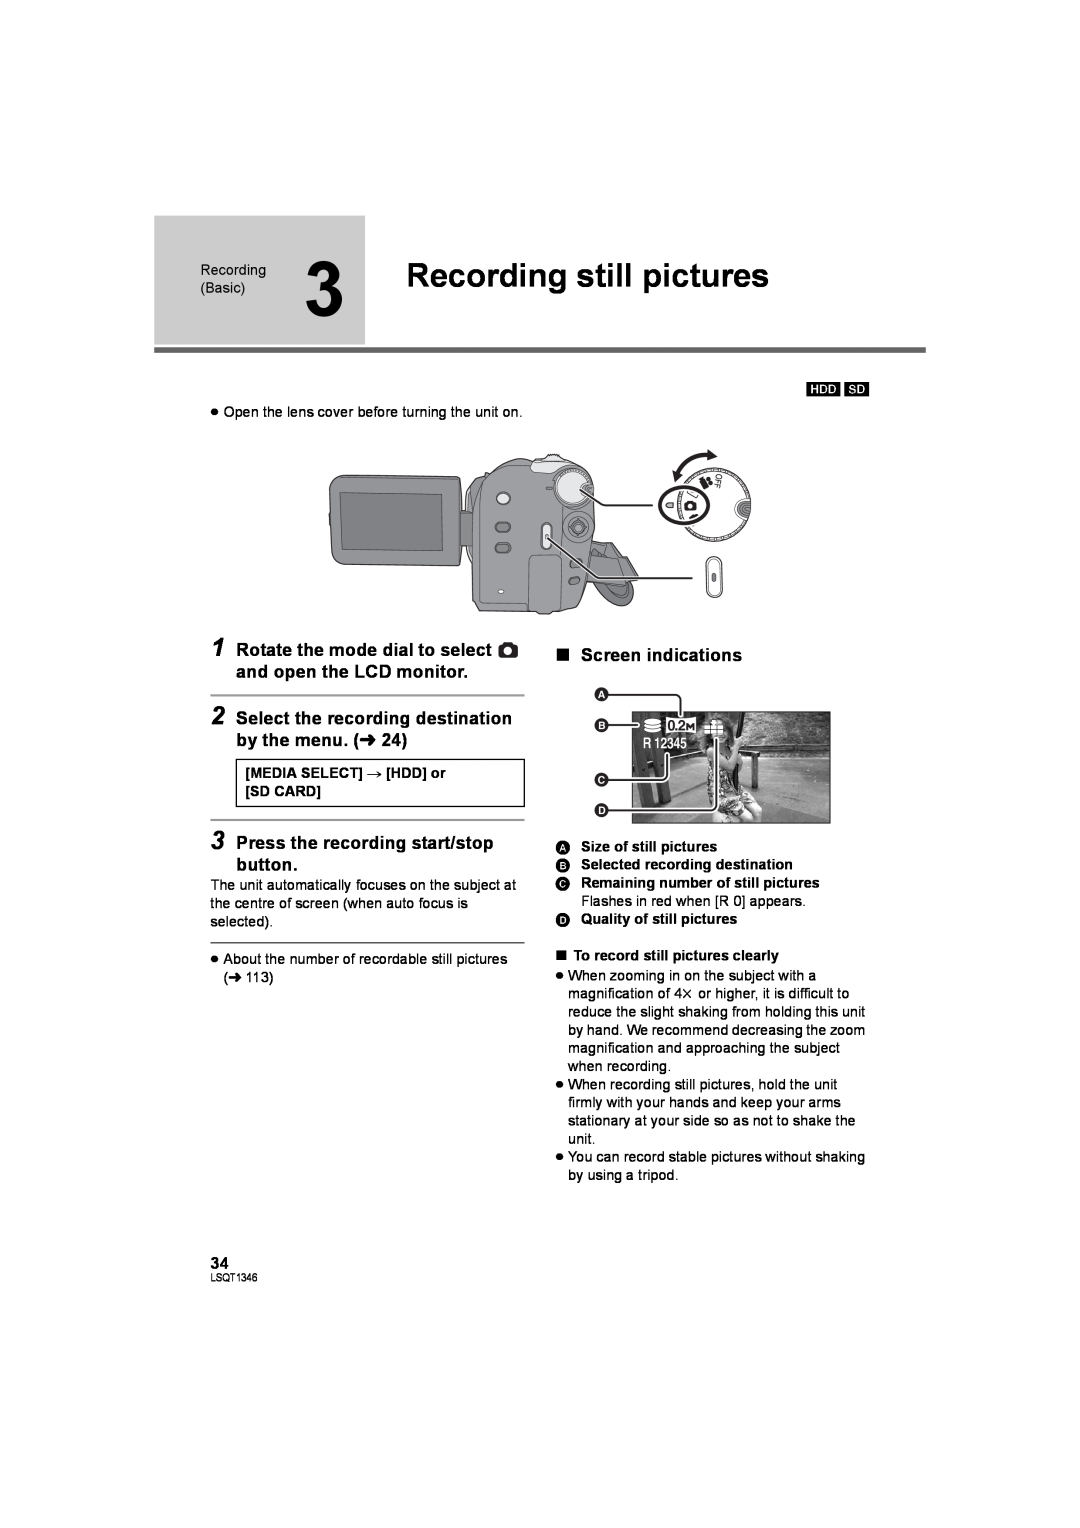 Panasonic SDR-H50 Recording still pictures, Press the recording start/stop button, ∫ Screen indications 